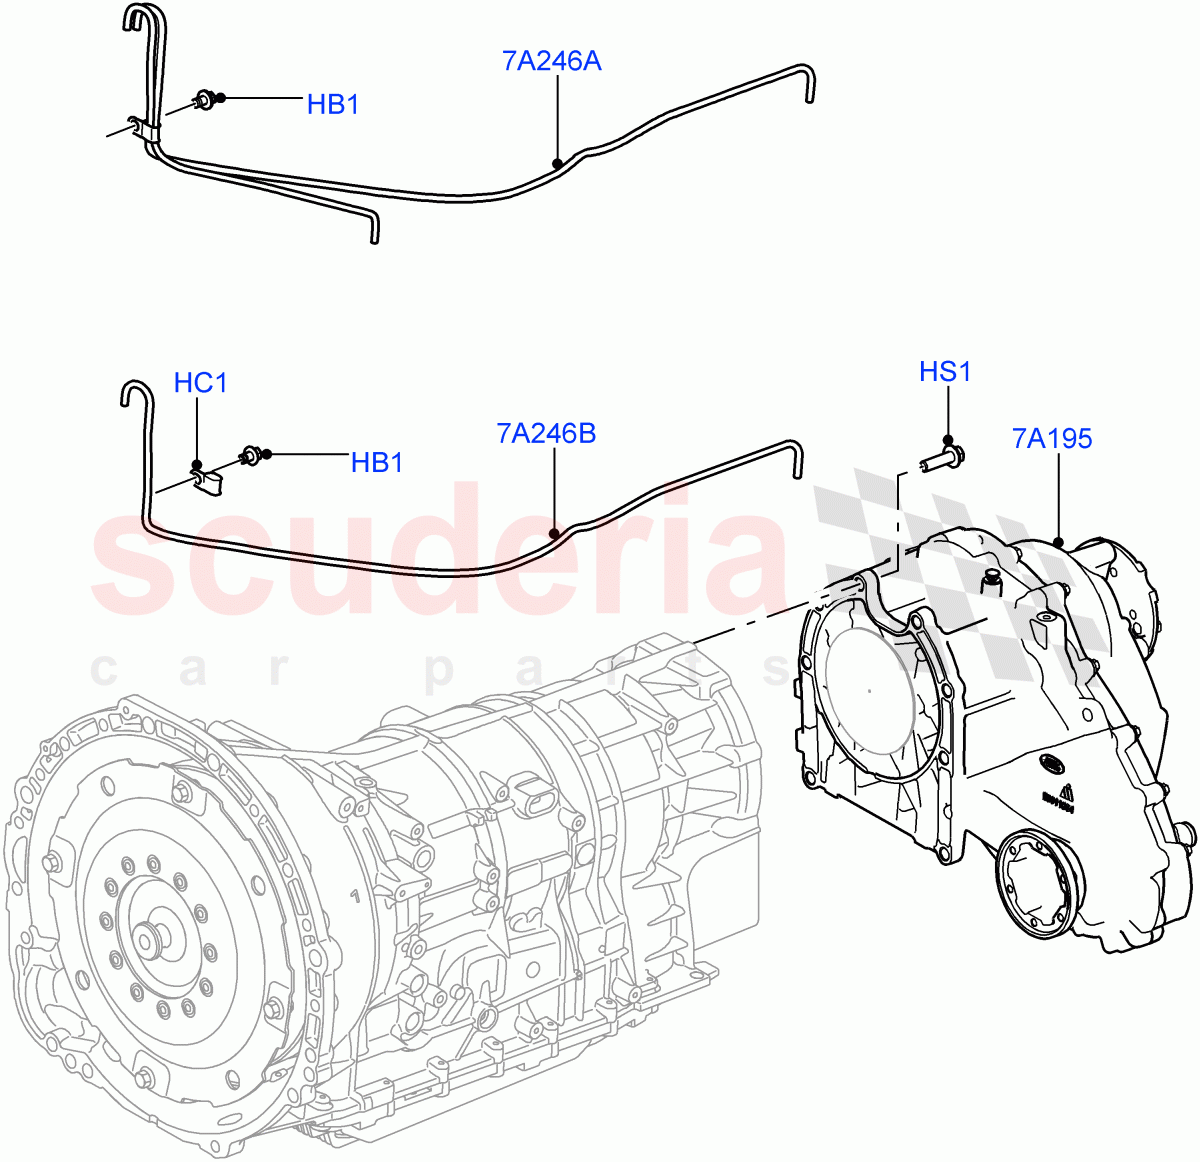 Transfer Drive Case(8 Speed Auto Trans ZF 8HP70 4WD,With 1 Speed Transfer Case,8 Speed Auto Trans ZF 8HP45)((V)FROMEA000001,(V)TOGA999999) of Land Rover Land Rover Range Rover (2012-2021) [2.0 Turbo Petrol GTDI]